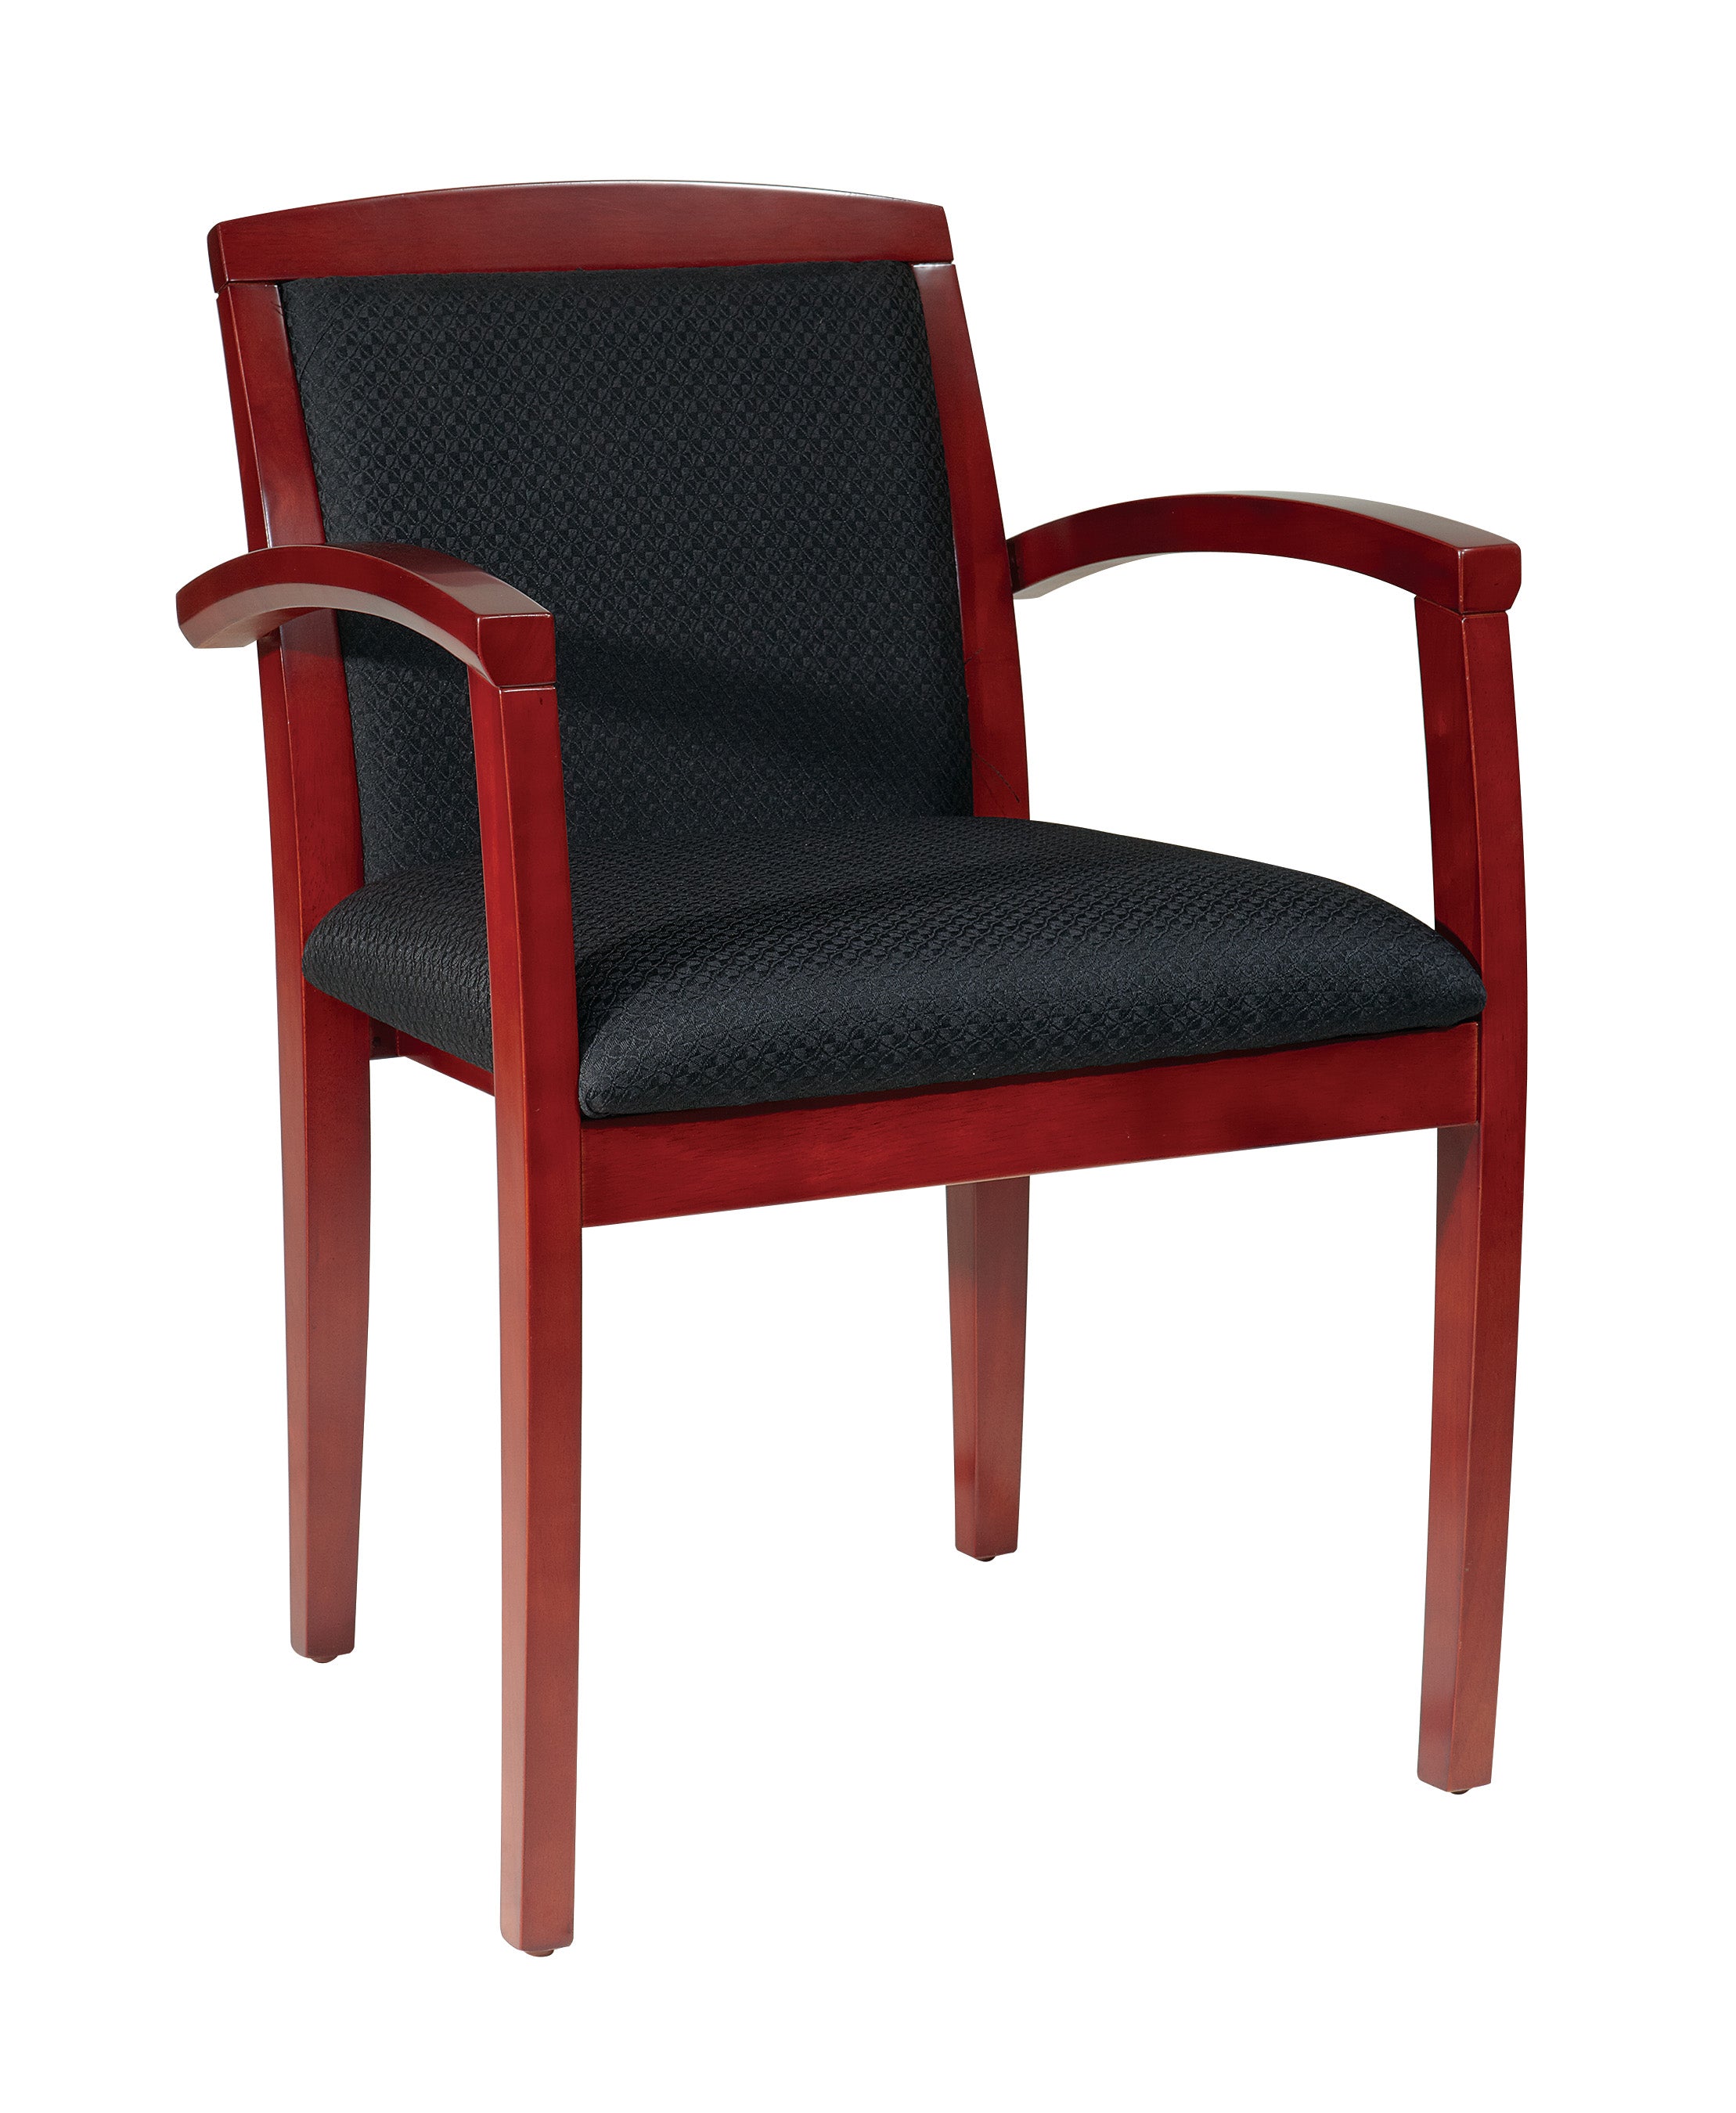 SON-129 - Sonoma Cherry Finish Guest Chair, Upholstered Back by Office Star (4 Pack)